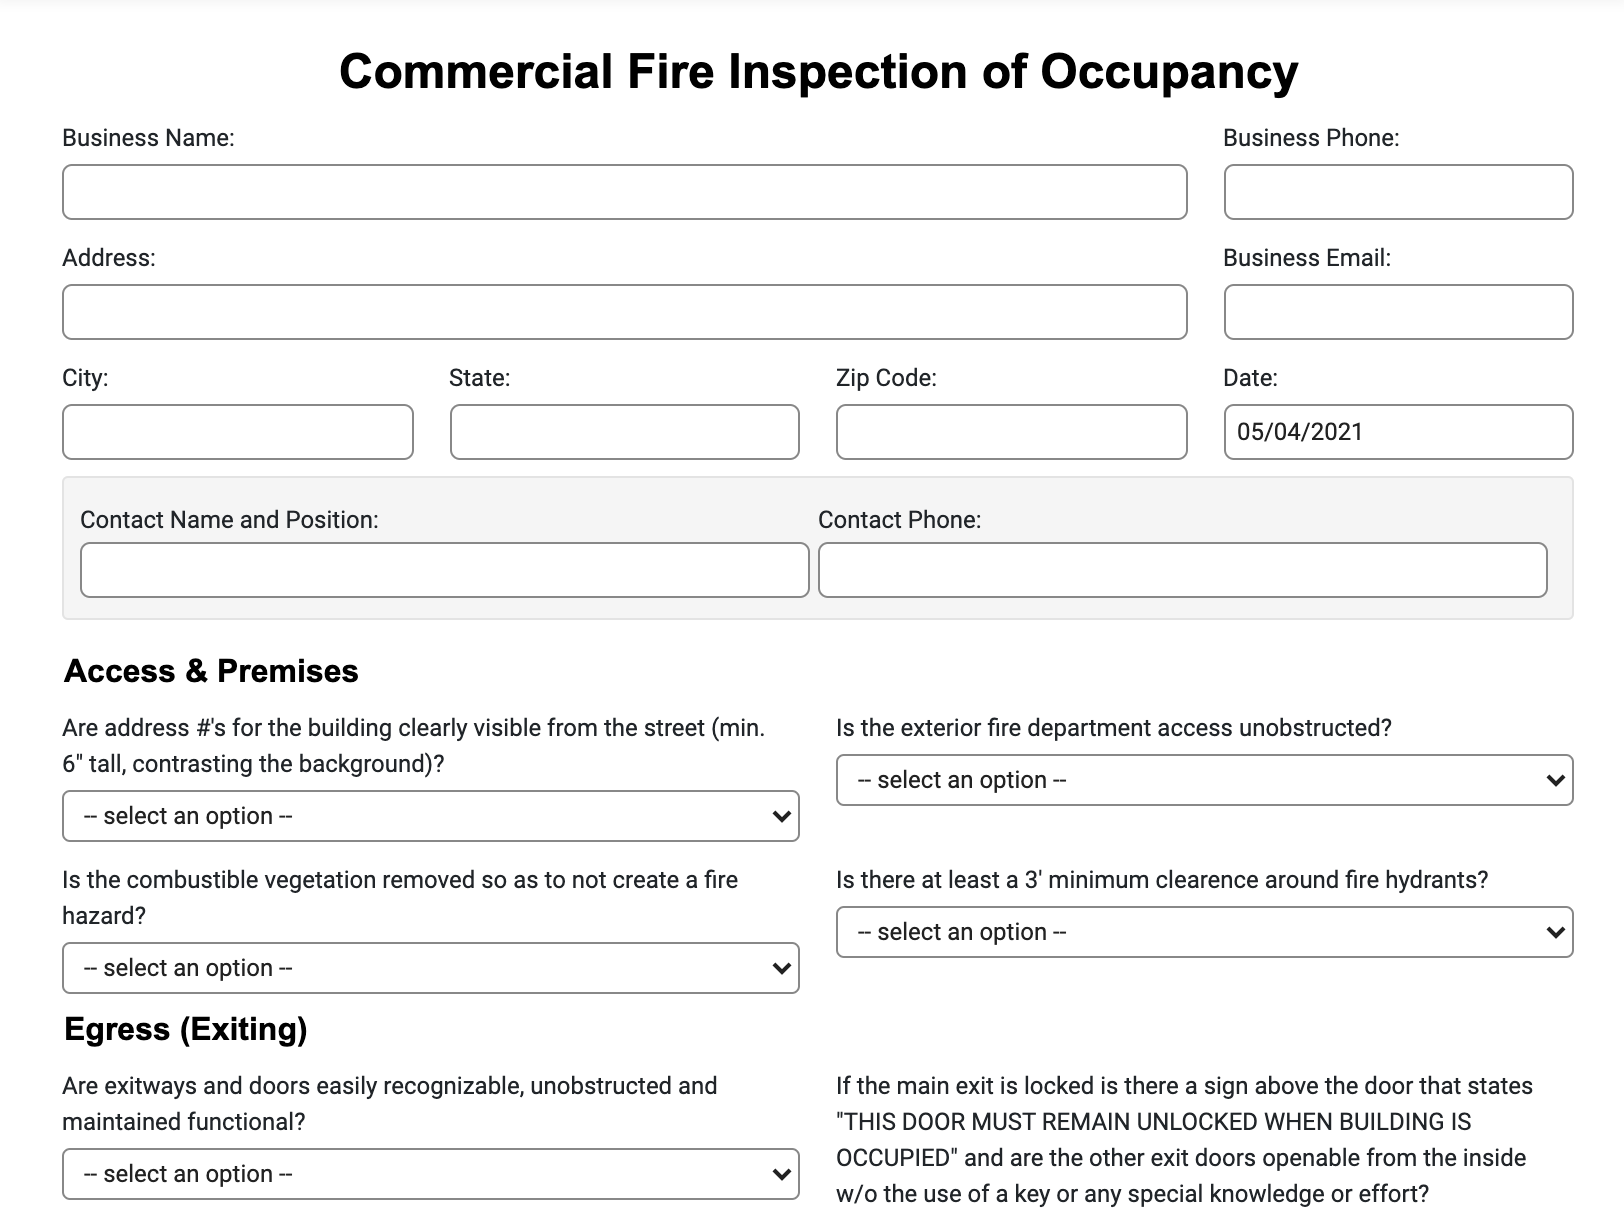 fire inspection of occupancy form